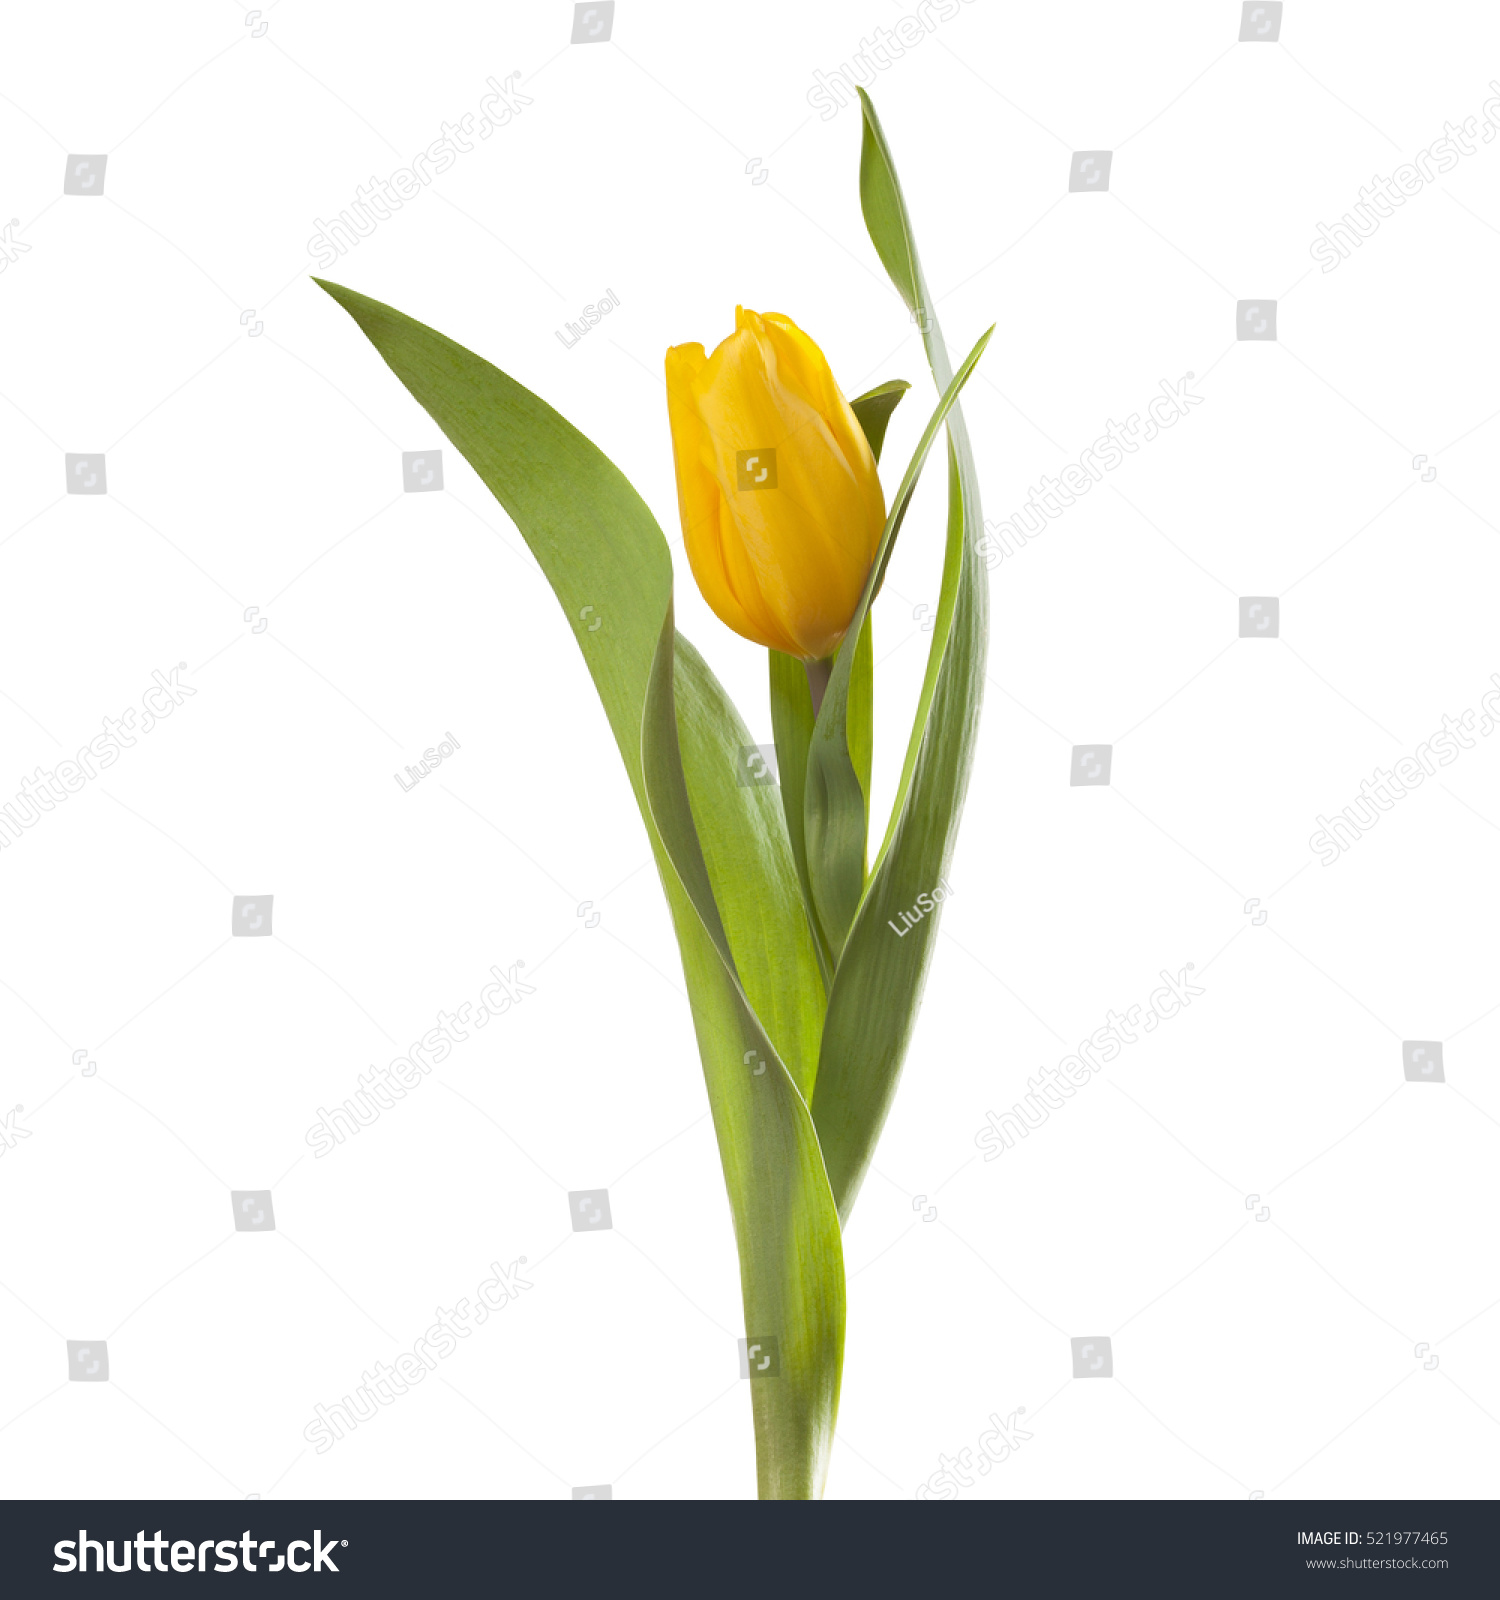 Yellow Tulip Flower On Stem Leaves Stock Photo (Download Now ...